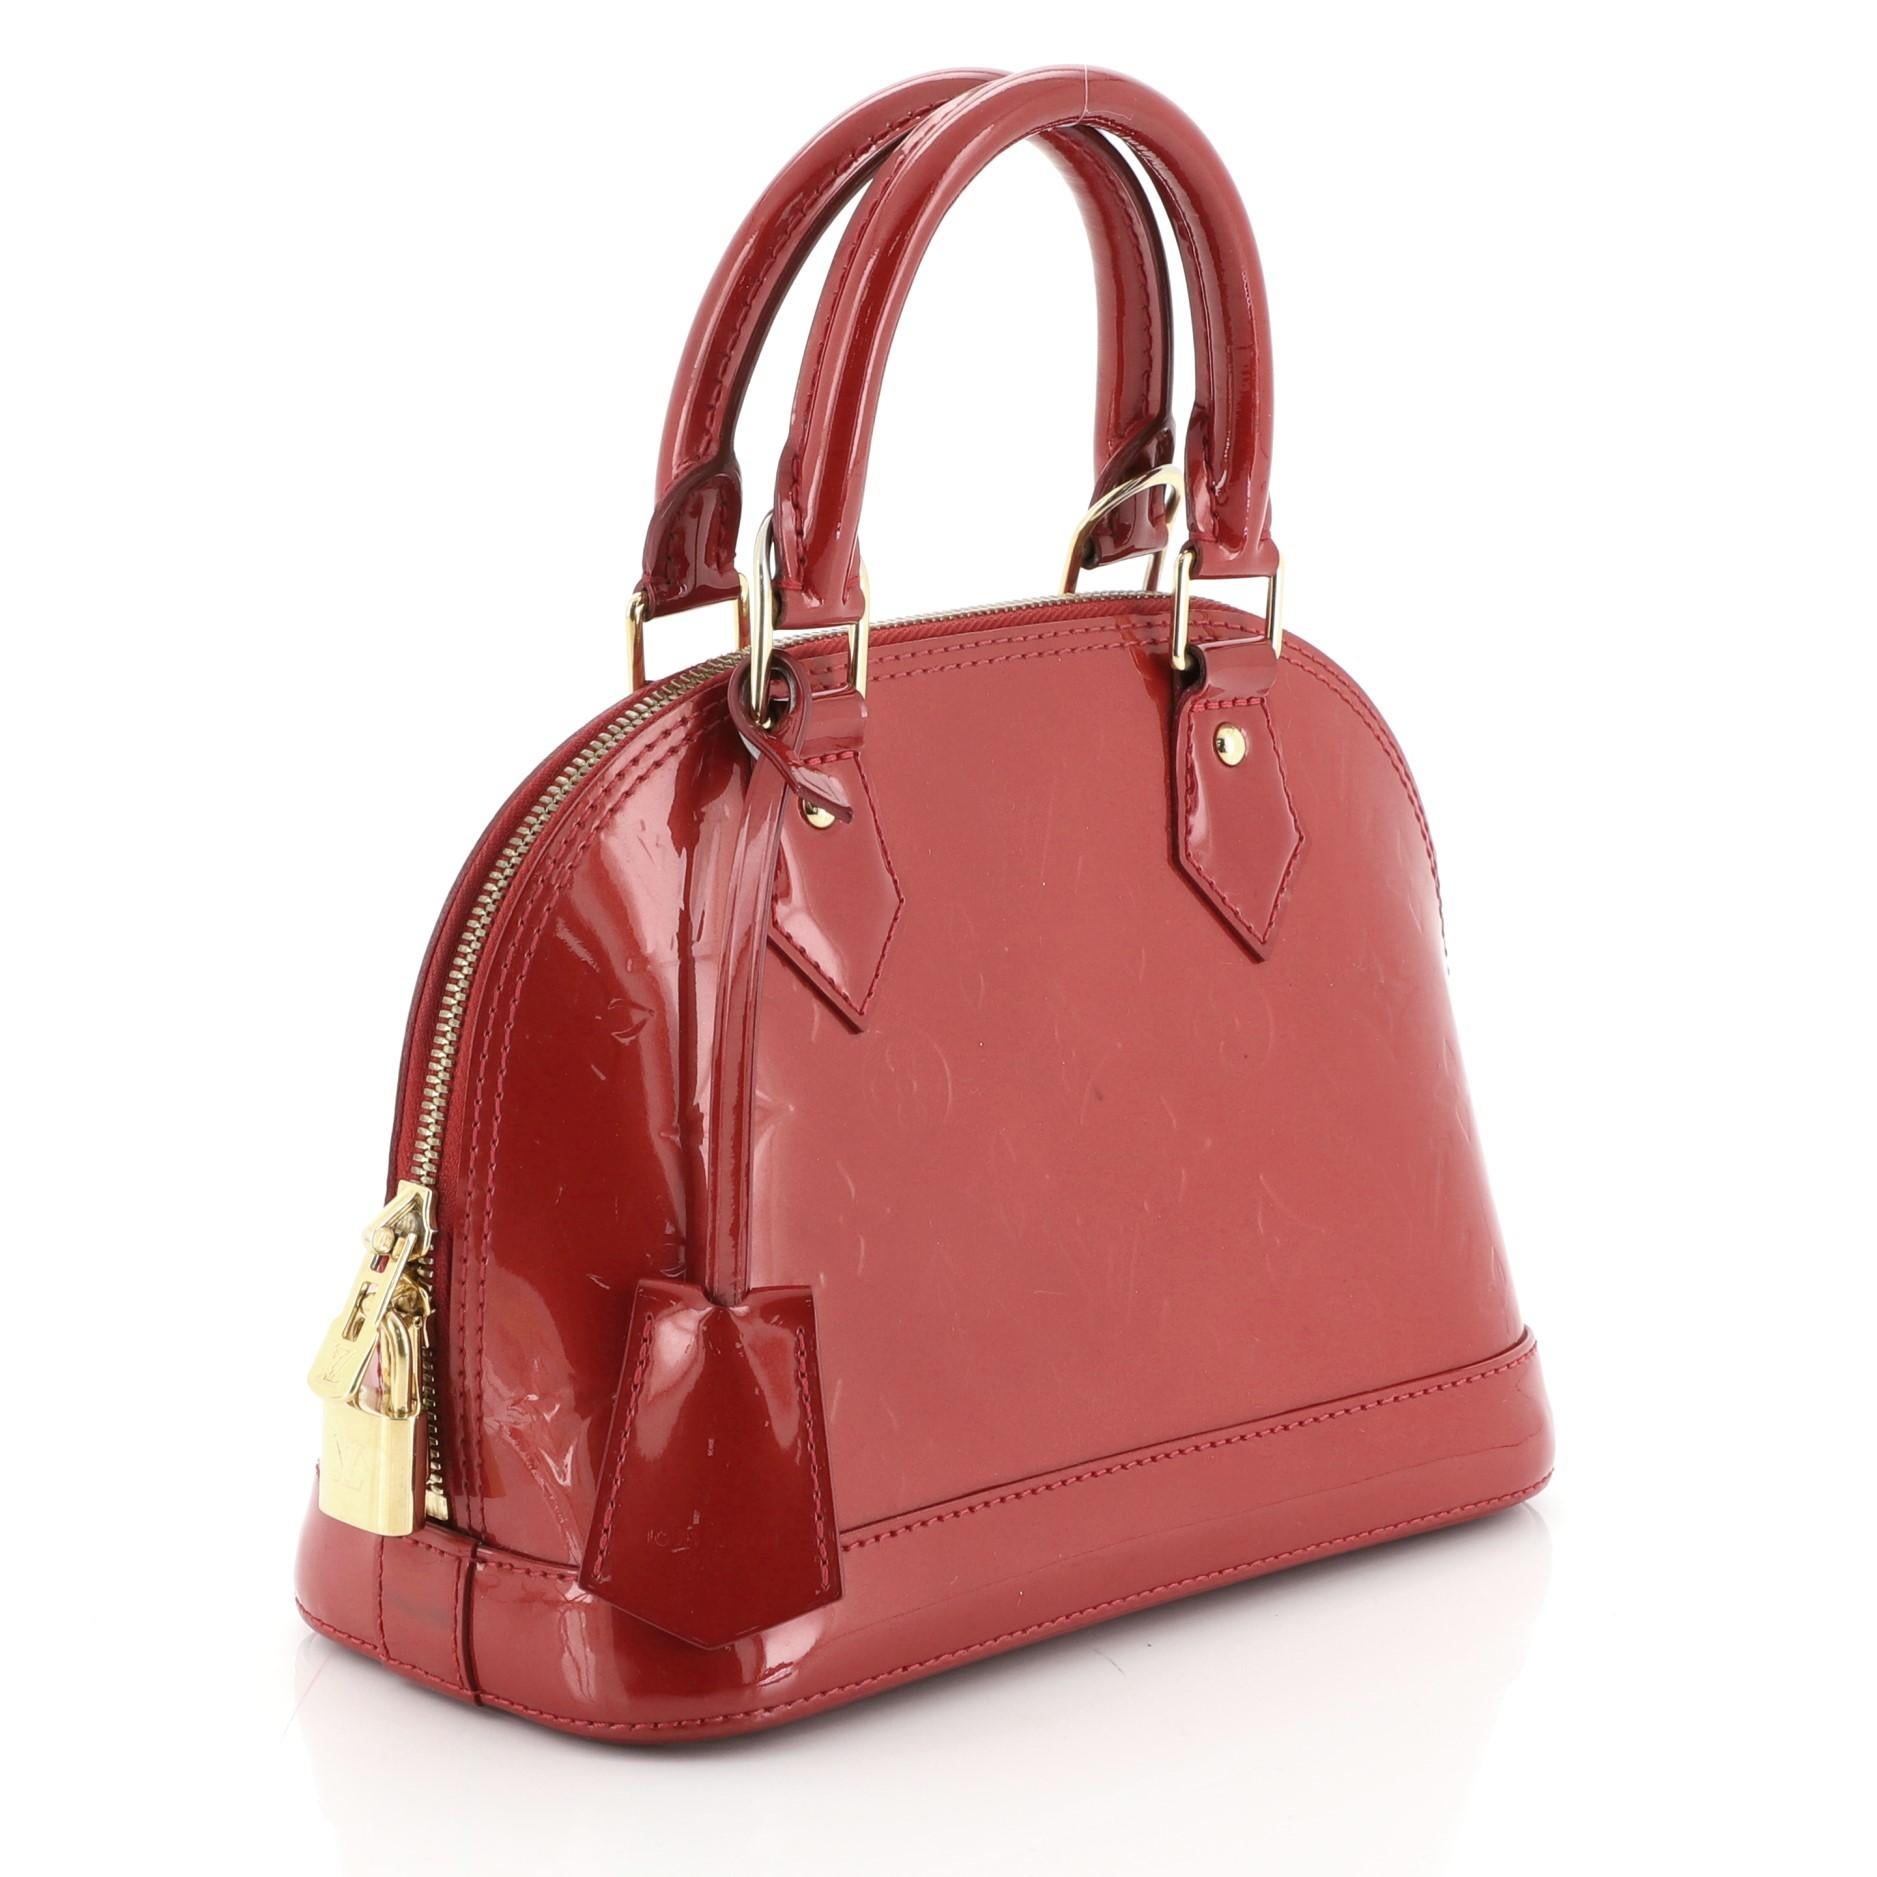 This Louis Vuitton Alma Handbag Monogram Vernis BB, crafted from red monogram vernis leather, features dual rolled handles, protective base studs, and gold-tone hardware. Its two-way zip closure opens to a red fabric interior with slip pocket.